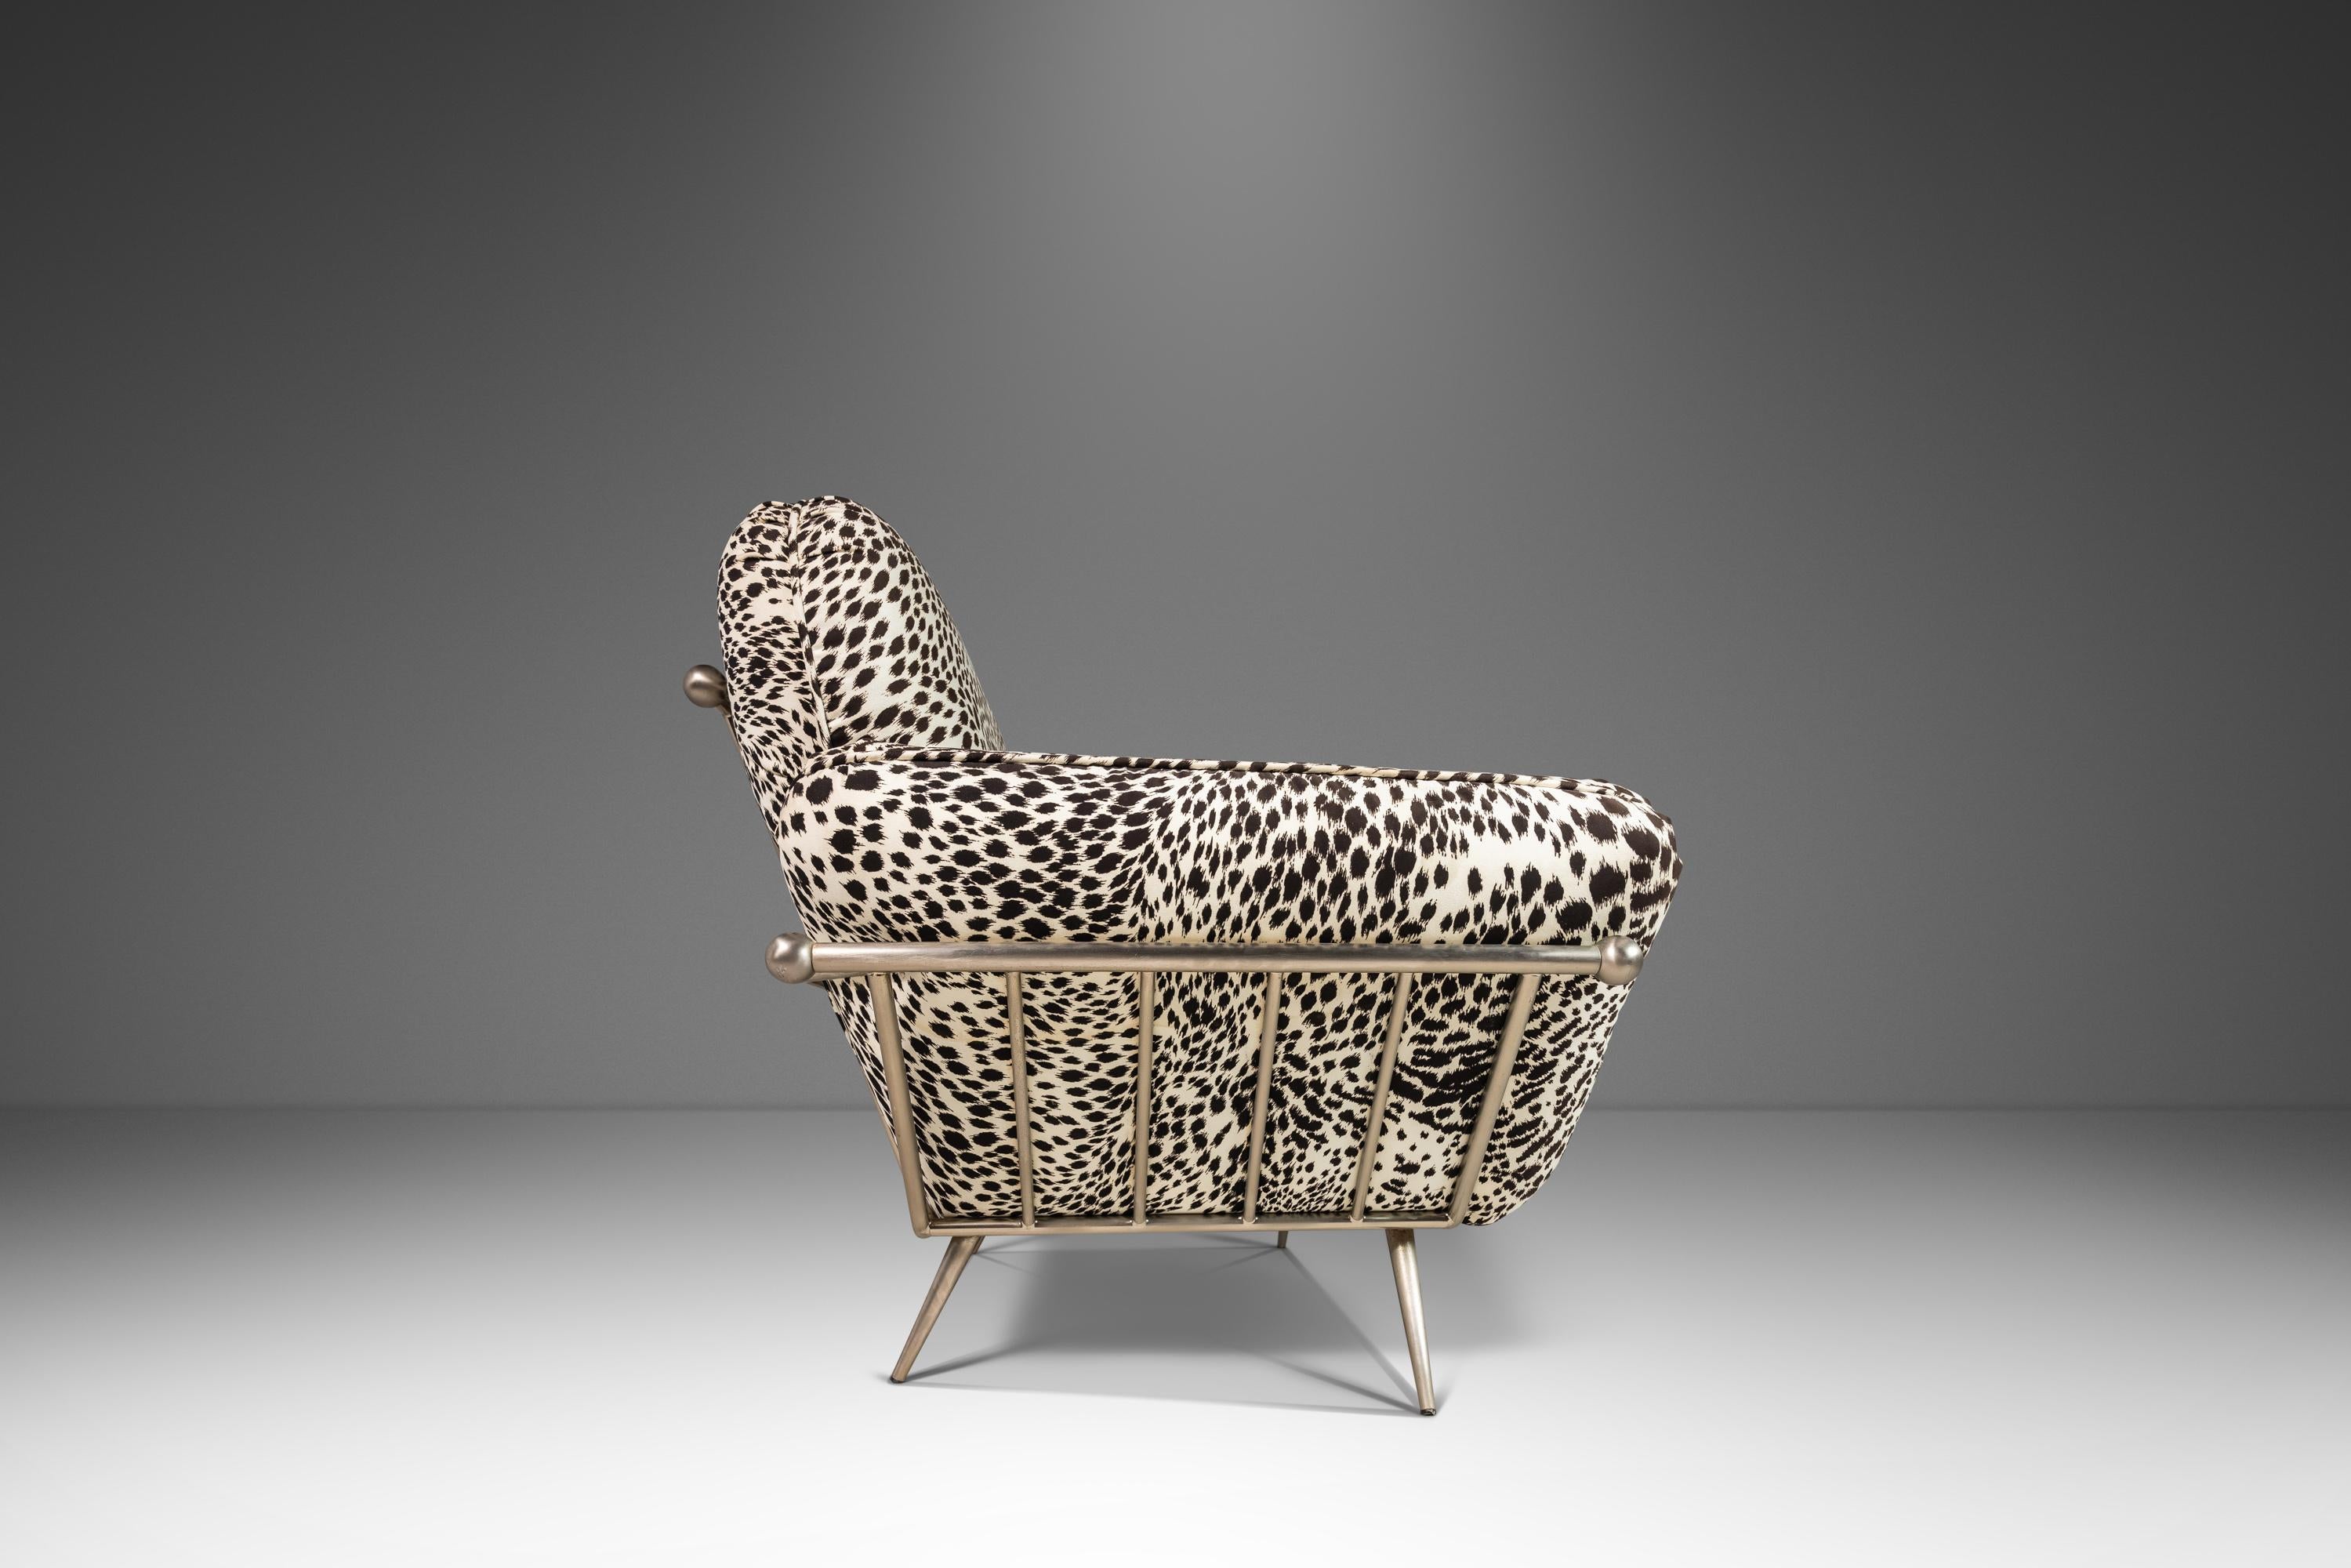 Steel Lounge Chair in Animal Print for Carson's Attributed to Milo Baughman, c. 1980's For Sale